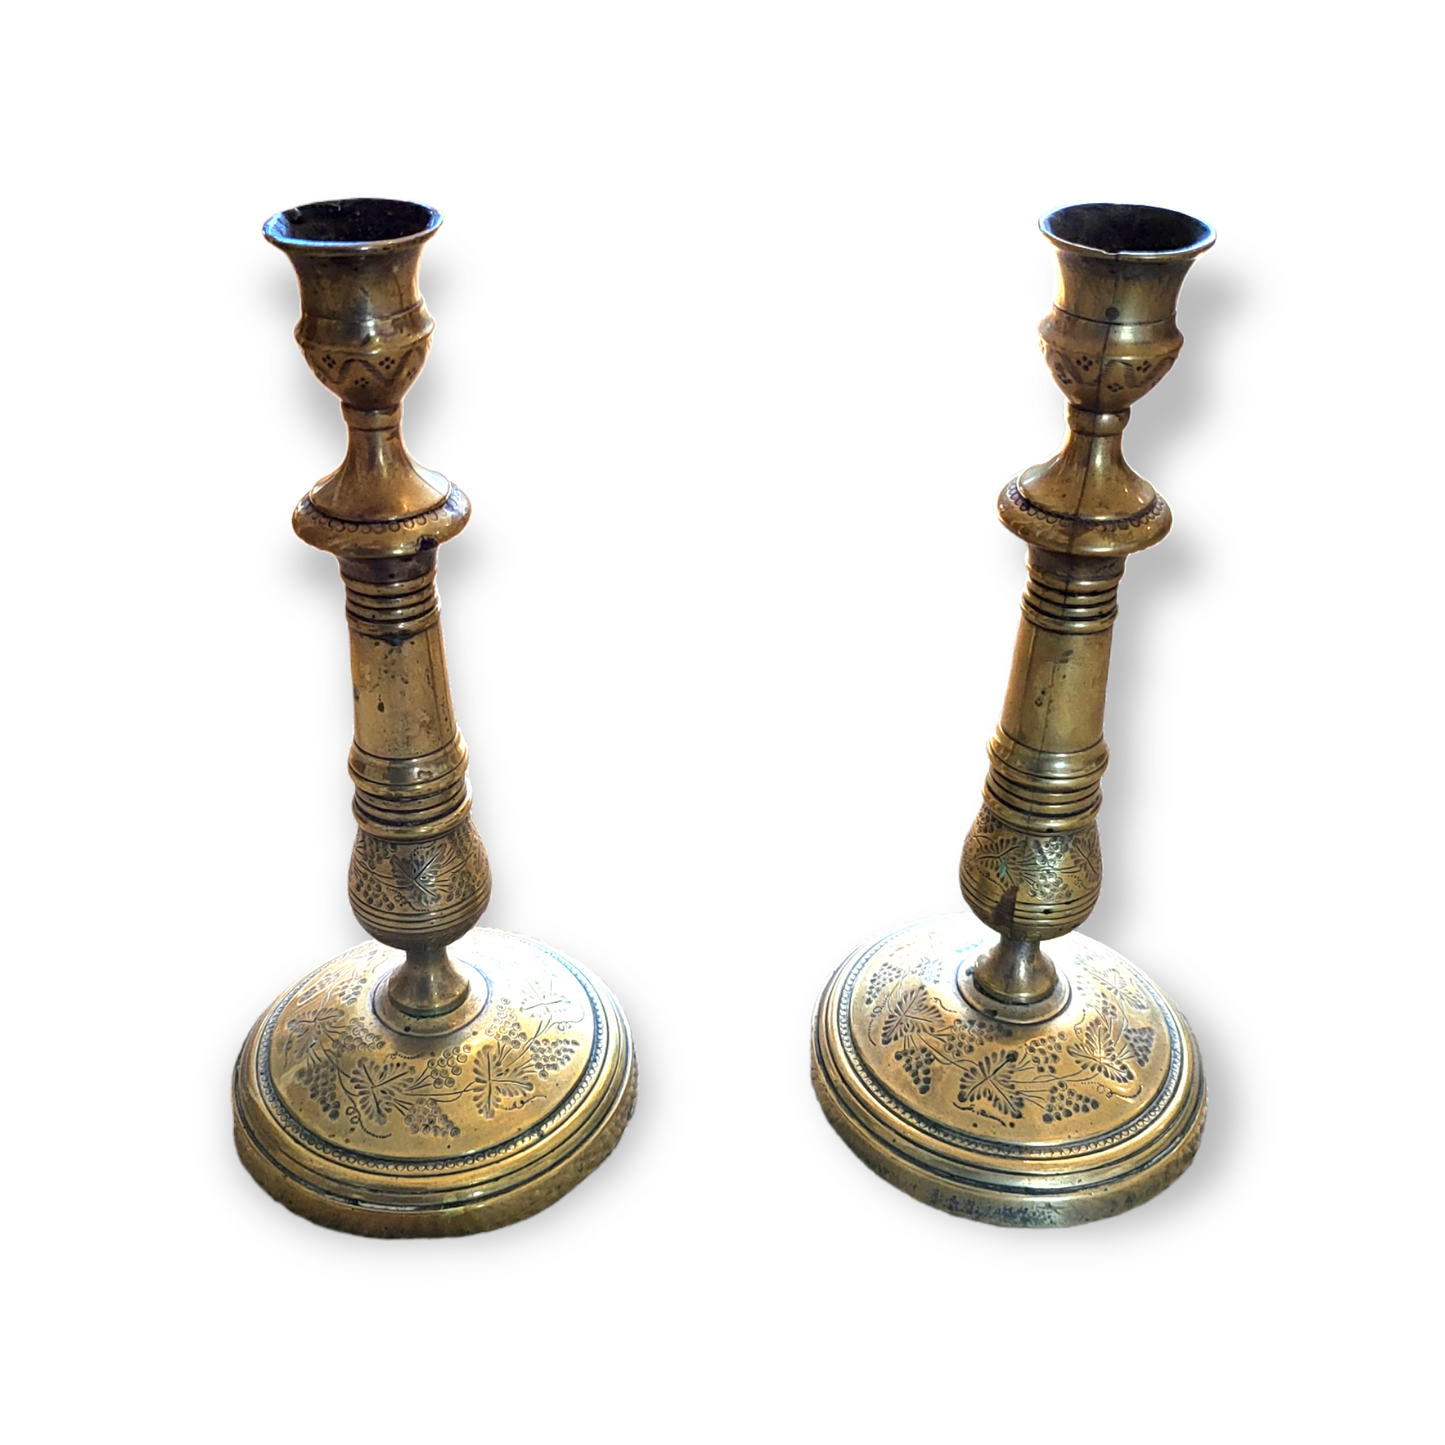 Antique Ornate Brass Candle Holders with Grape and Floral Patterns